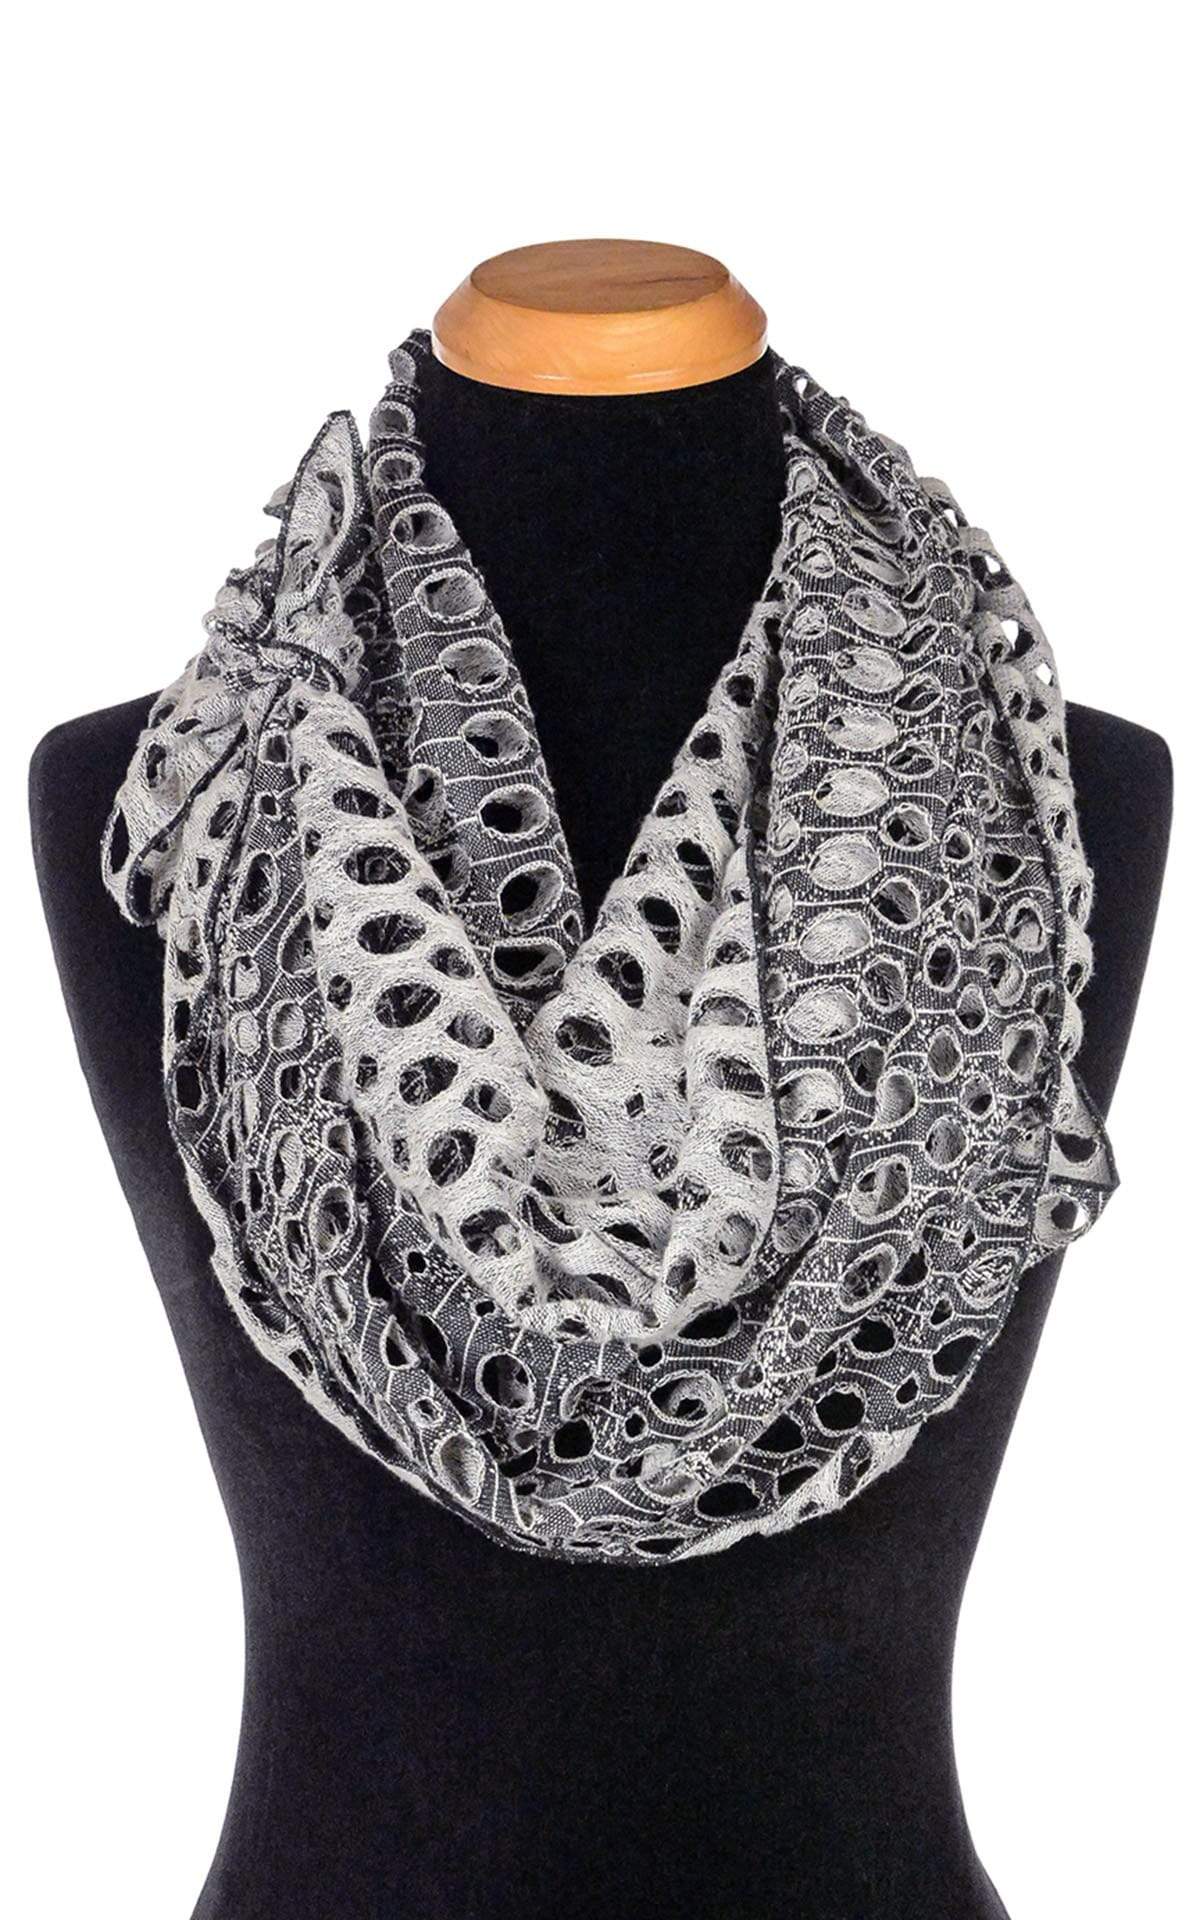 Women’s  Large Handkerchief Scarf, Wrap on Mannequin shown double looped around neck | Lunar Landing, a black and neutral knit with curled edges surrounding holes| Handmade in Seattle WA | Pandemonium Millinery